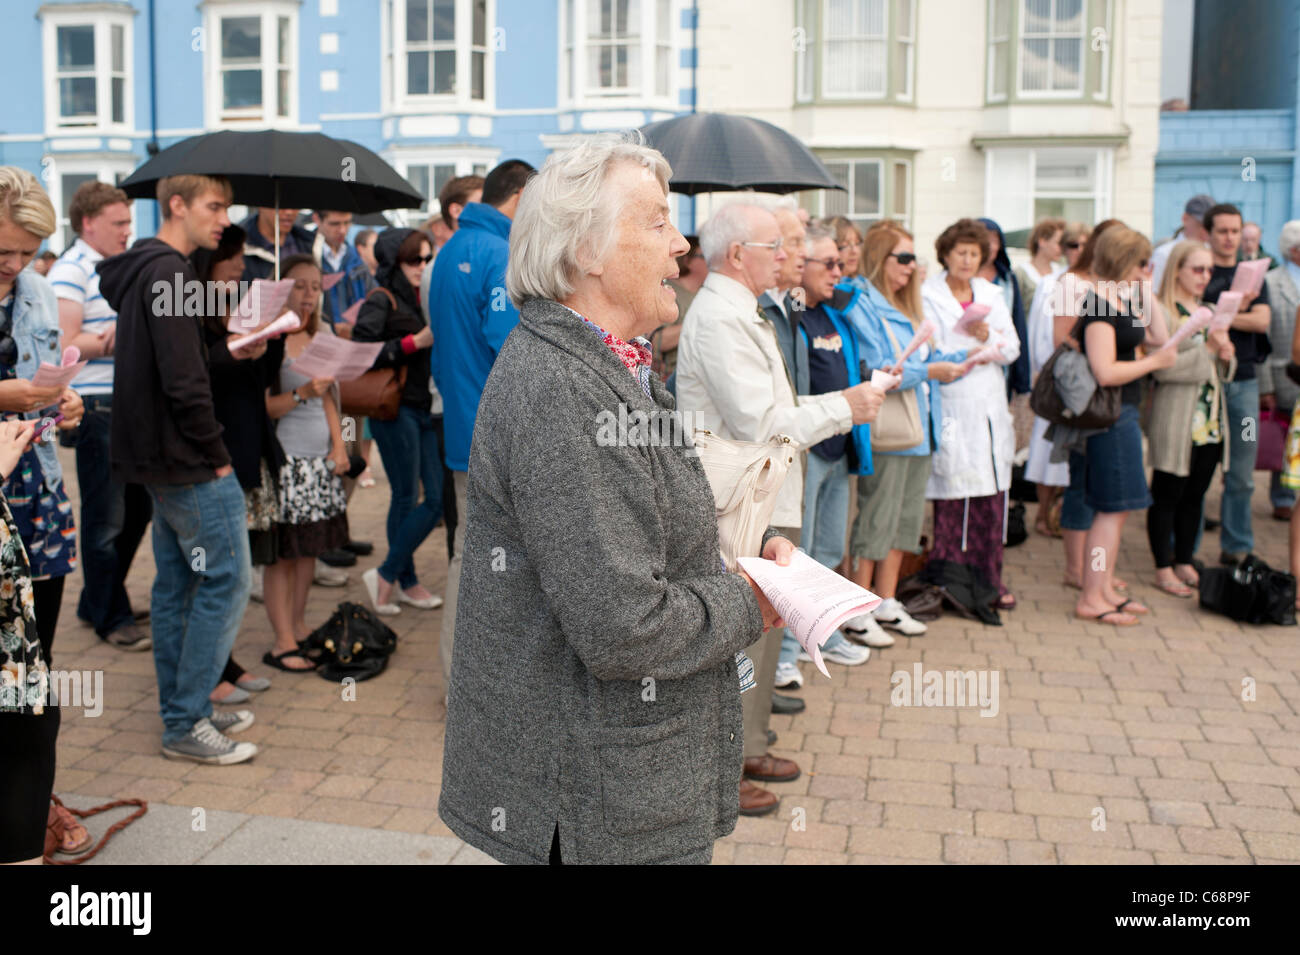 Evangelical Christian outdoor worship service on the promenade at Aberystwyth Wales UK Stock Photo